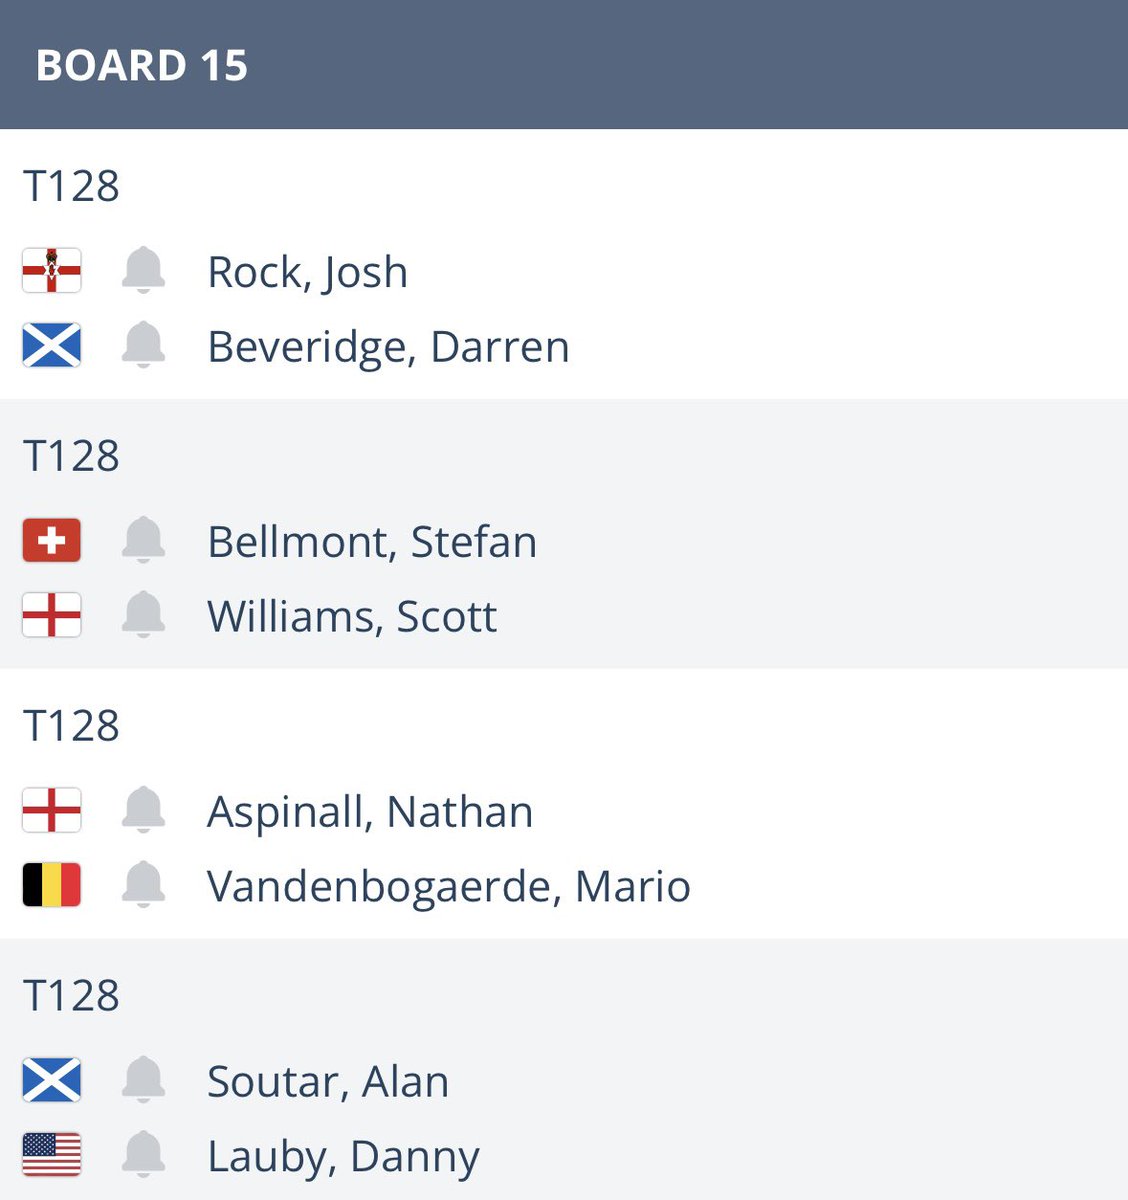 Players Championship 7 Board 15 1st Game On Starts at 13:00 BST Catch the scores on DartConnect TV🎯 *Selected games will be streamed on PDCTV* #TeamRocky @OfficialPDC @MissionDarts @ScottRBSLtd @philipmcburney @SKFlooring2 @Zala_Sports